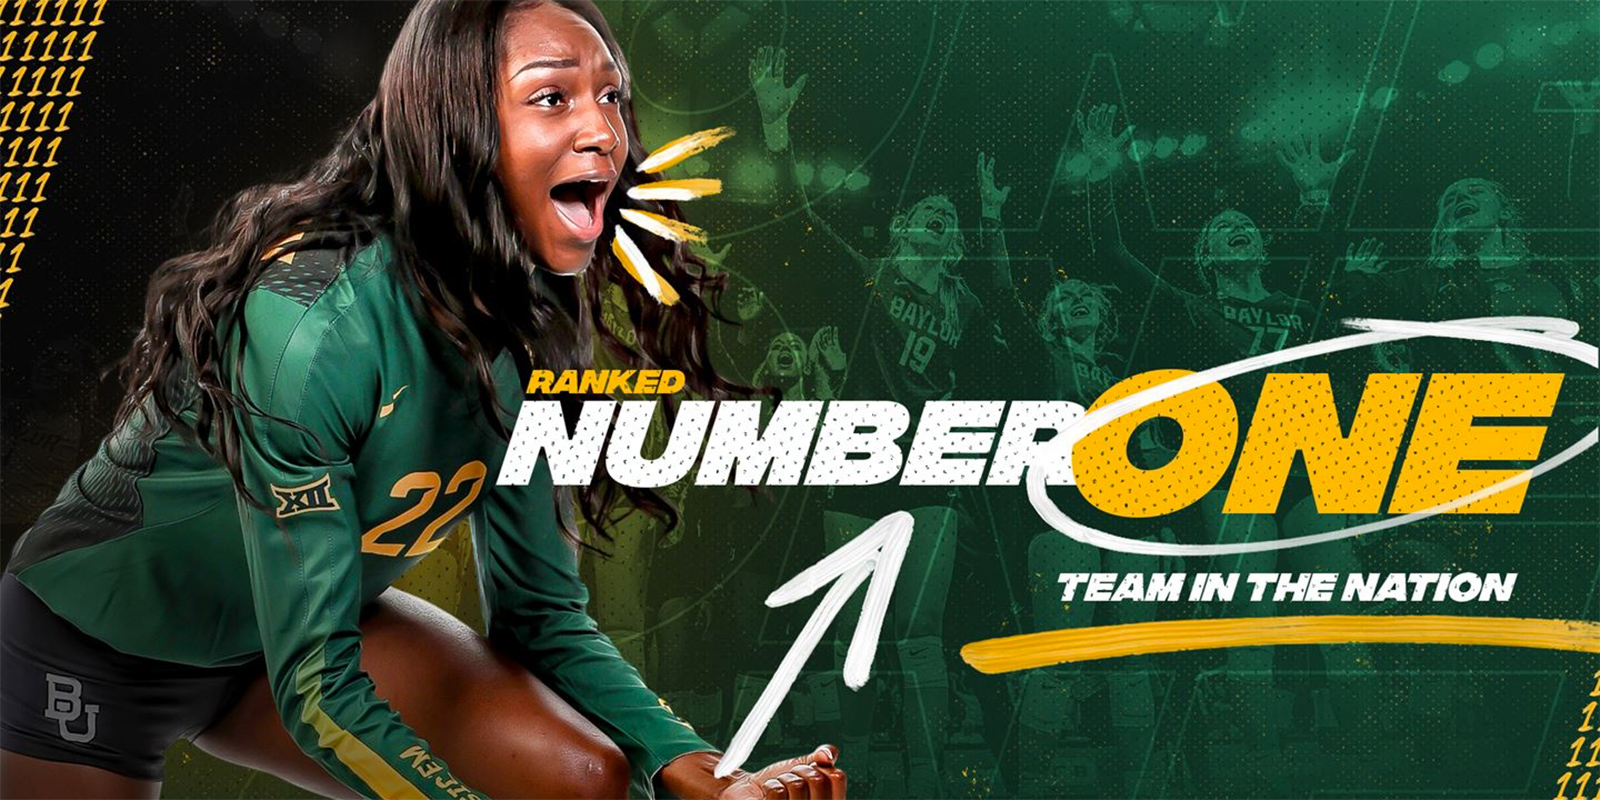 Baylor volleyball ranked No. 1 in the nation